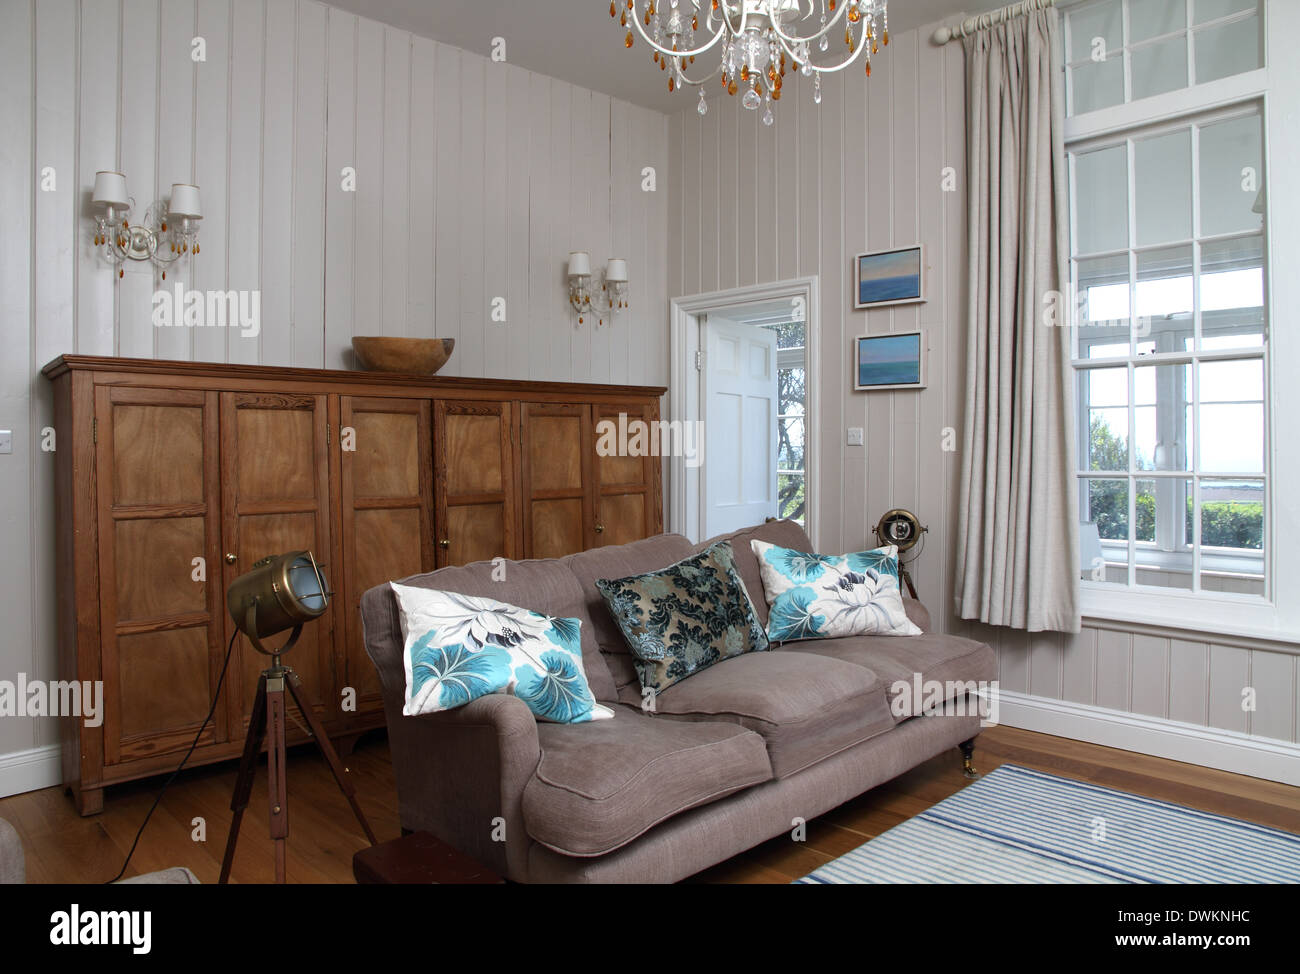 Sitting room with large wooden sideboard, beige sofa,wooden floor with rug. Large sash window Stock Photo